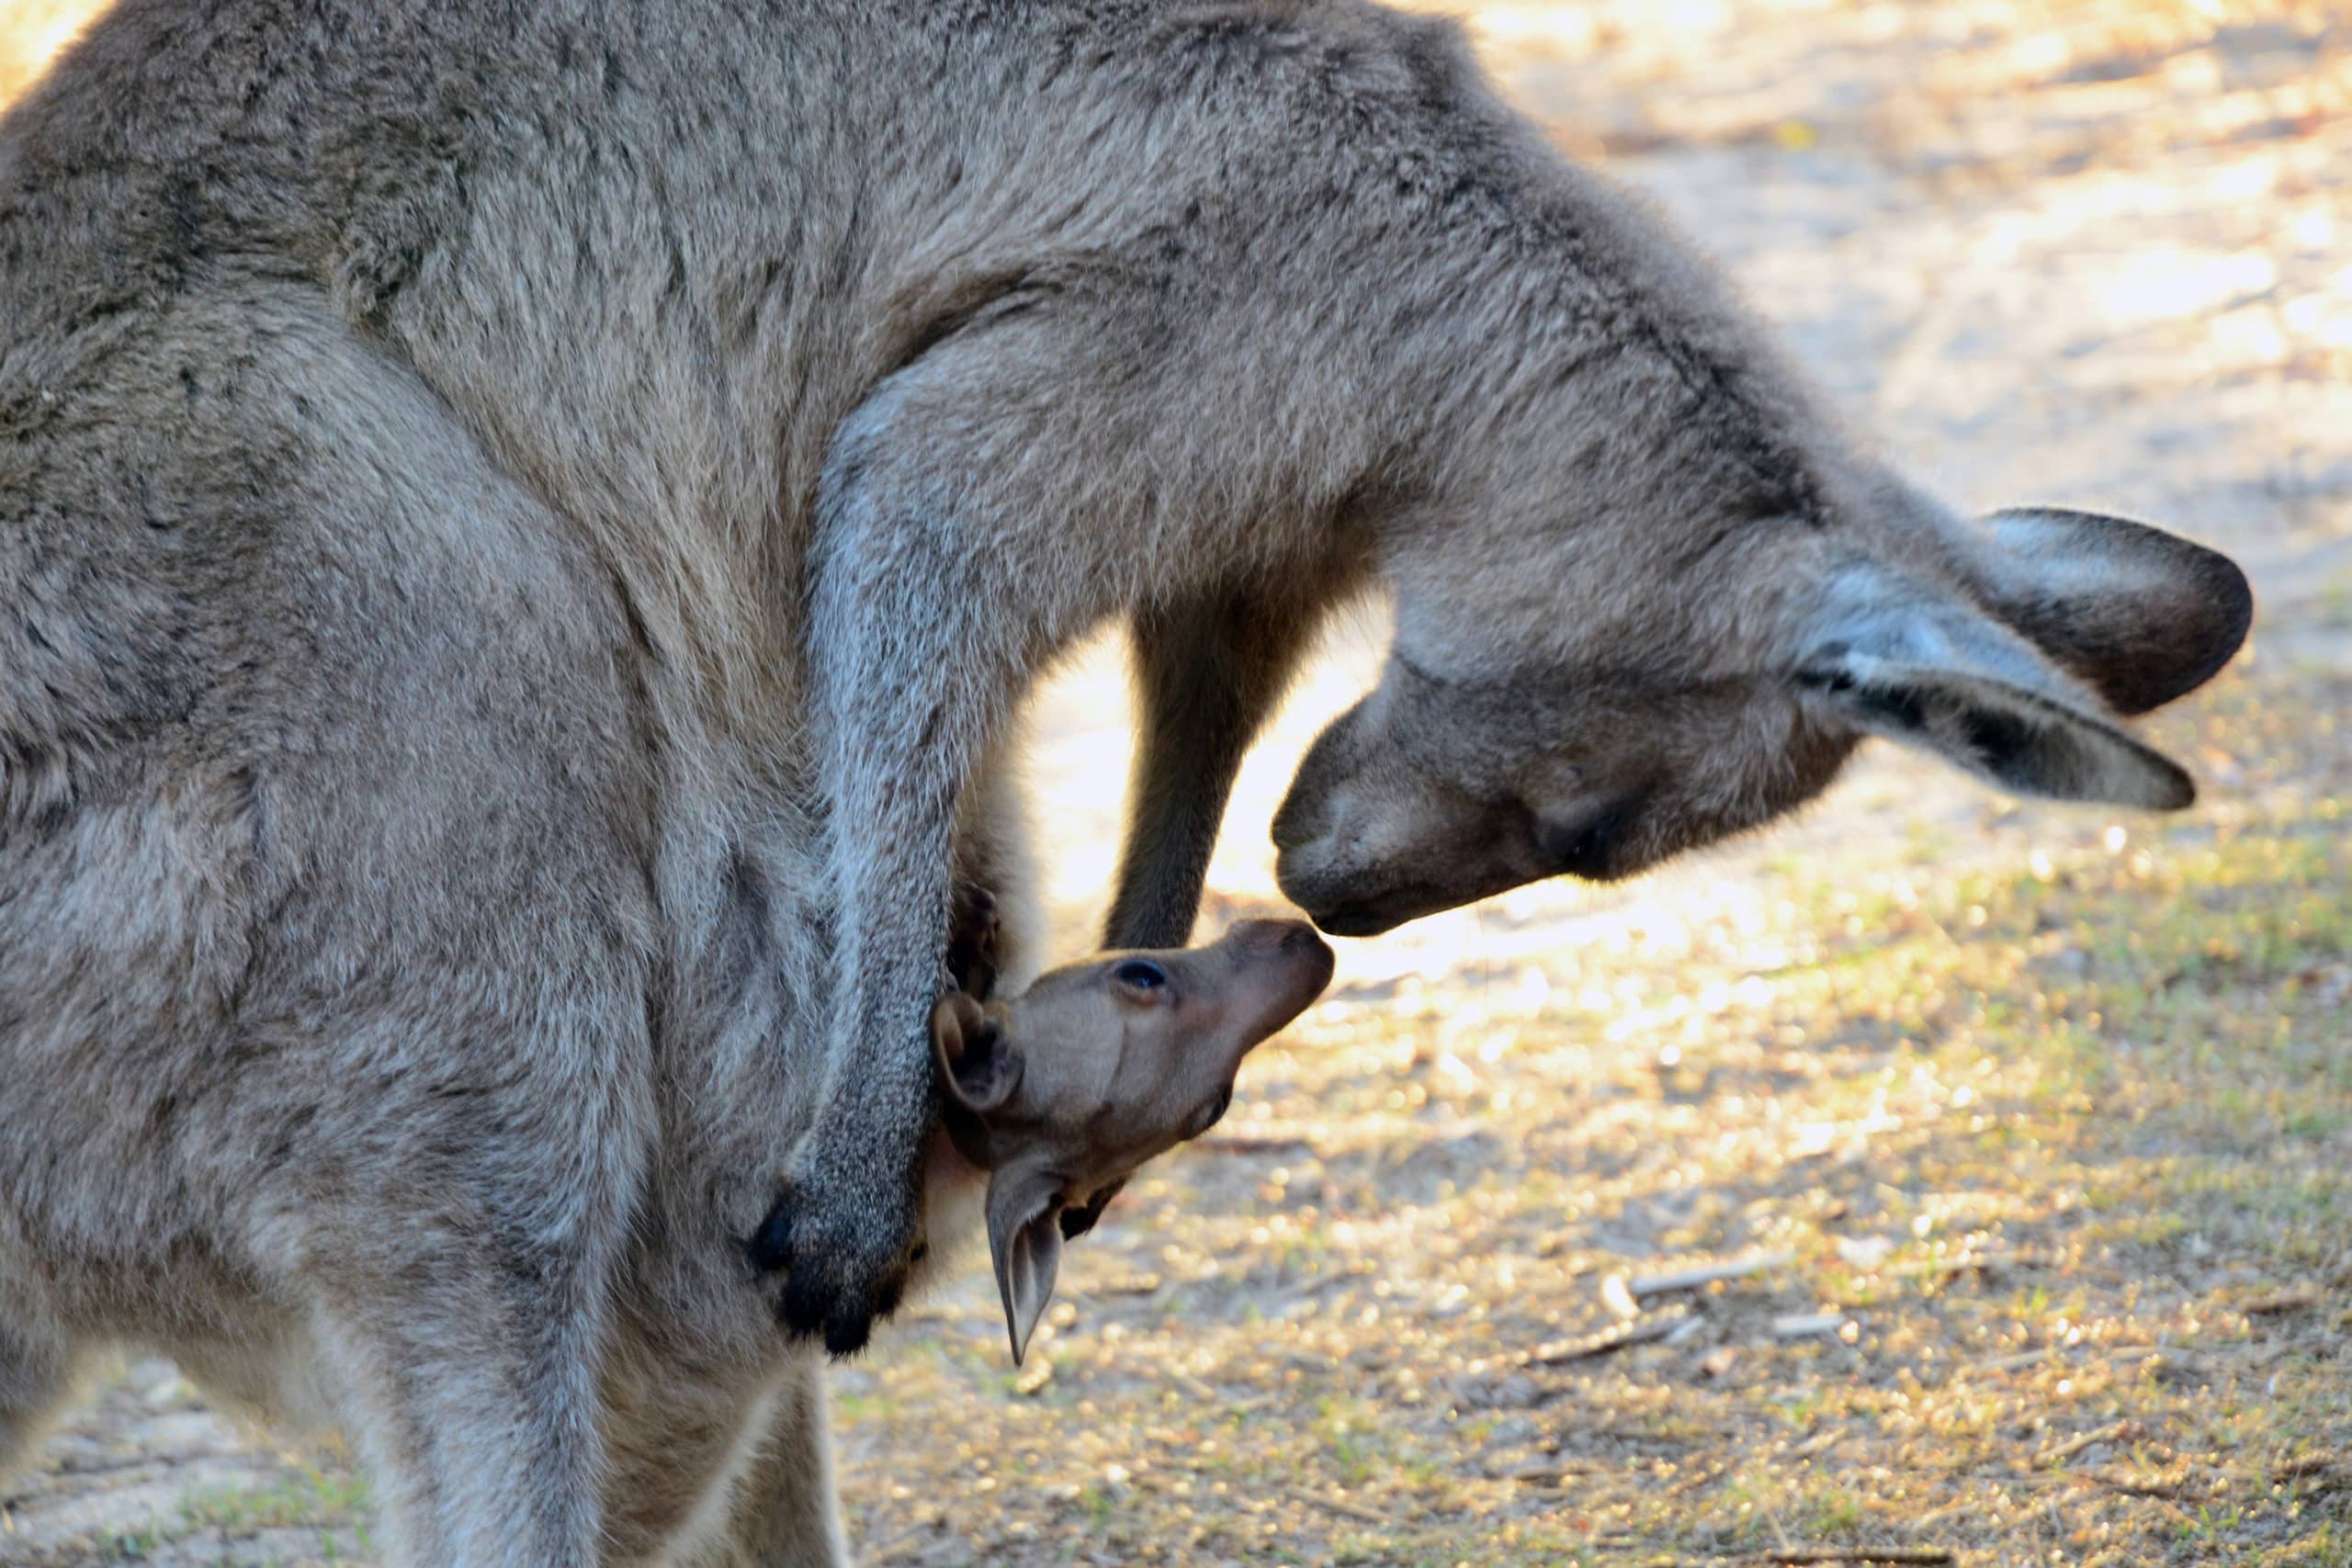 NSW kangaroo exports approved despite grave concerns raised by Parliamentary Inquiry